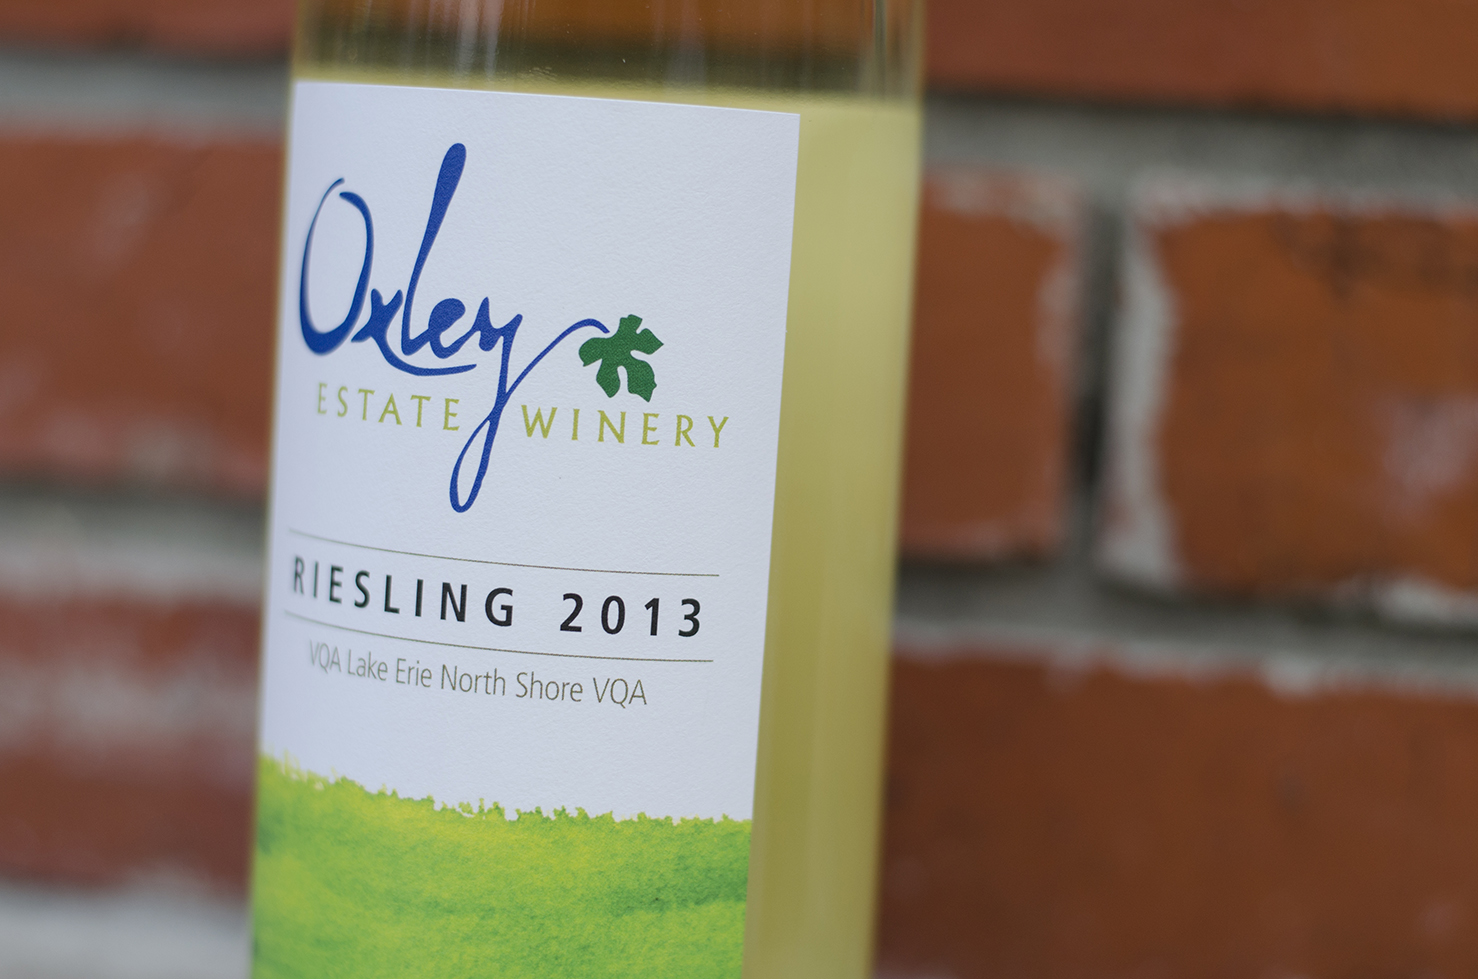 Oxley Estate Winery's Riesling